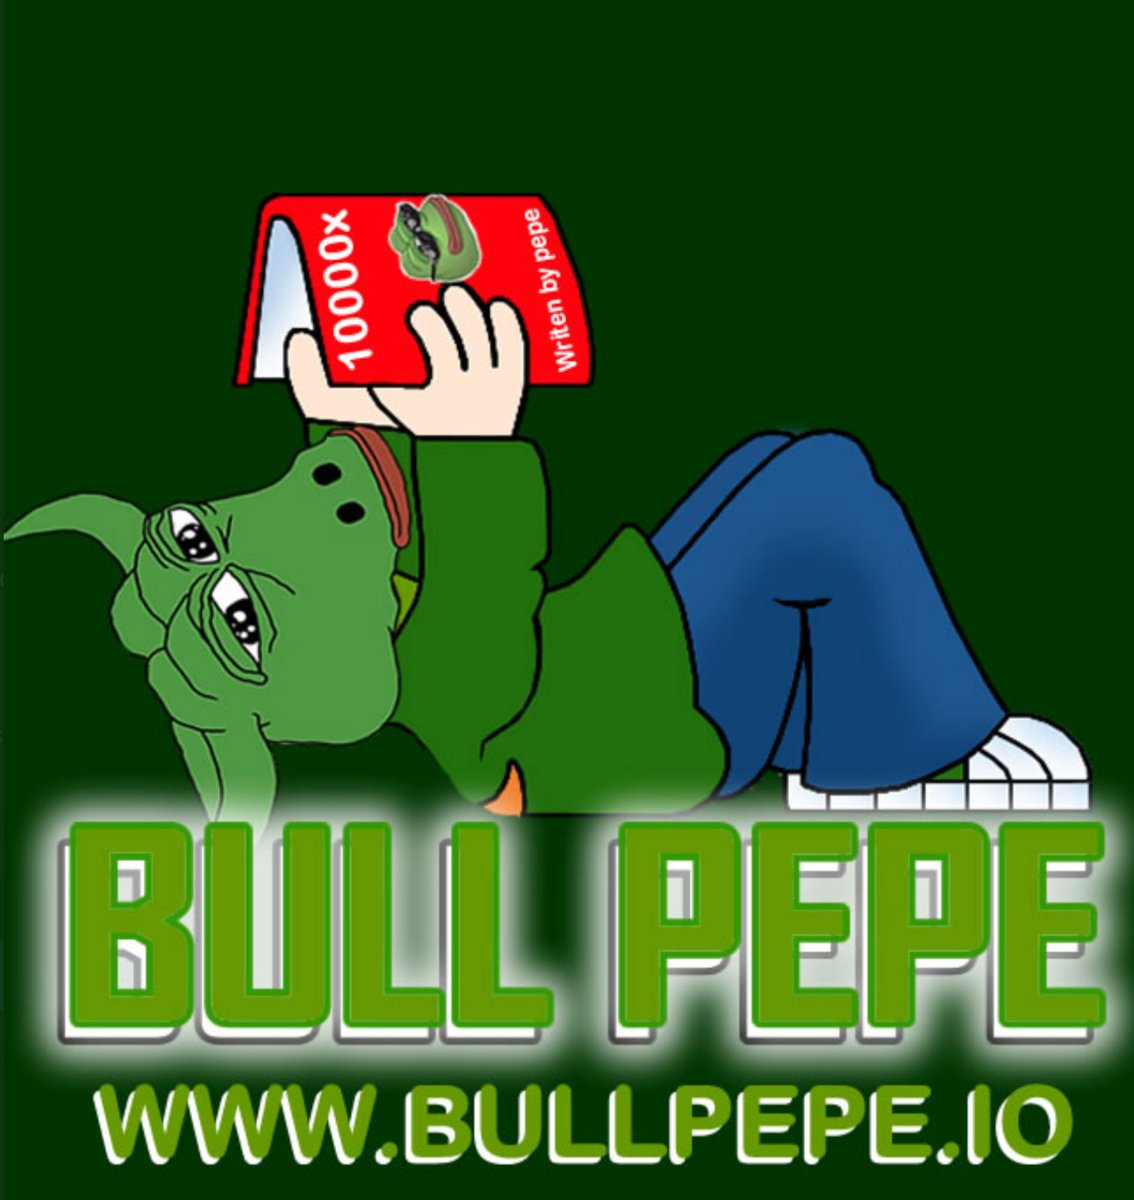 Powered By PEPE Community 
BULLPEPE JUST LAUNCHED ON PANCAKESWAP 
1 DOLLAR TO MAKE 100DOLLAR THIS WEEK
BUY NOW 
pancakeswap.finance/swap?outputCur…

Website: bullpepe.io 

RT + Follow 
@bullpepeio

Join Telegram
t.me/bullpepeoffici…

#pepe #CMC #COINGECKO #pepebull #bullpepe…